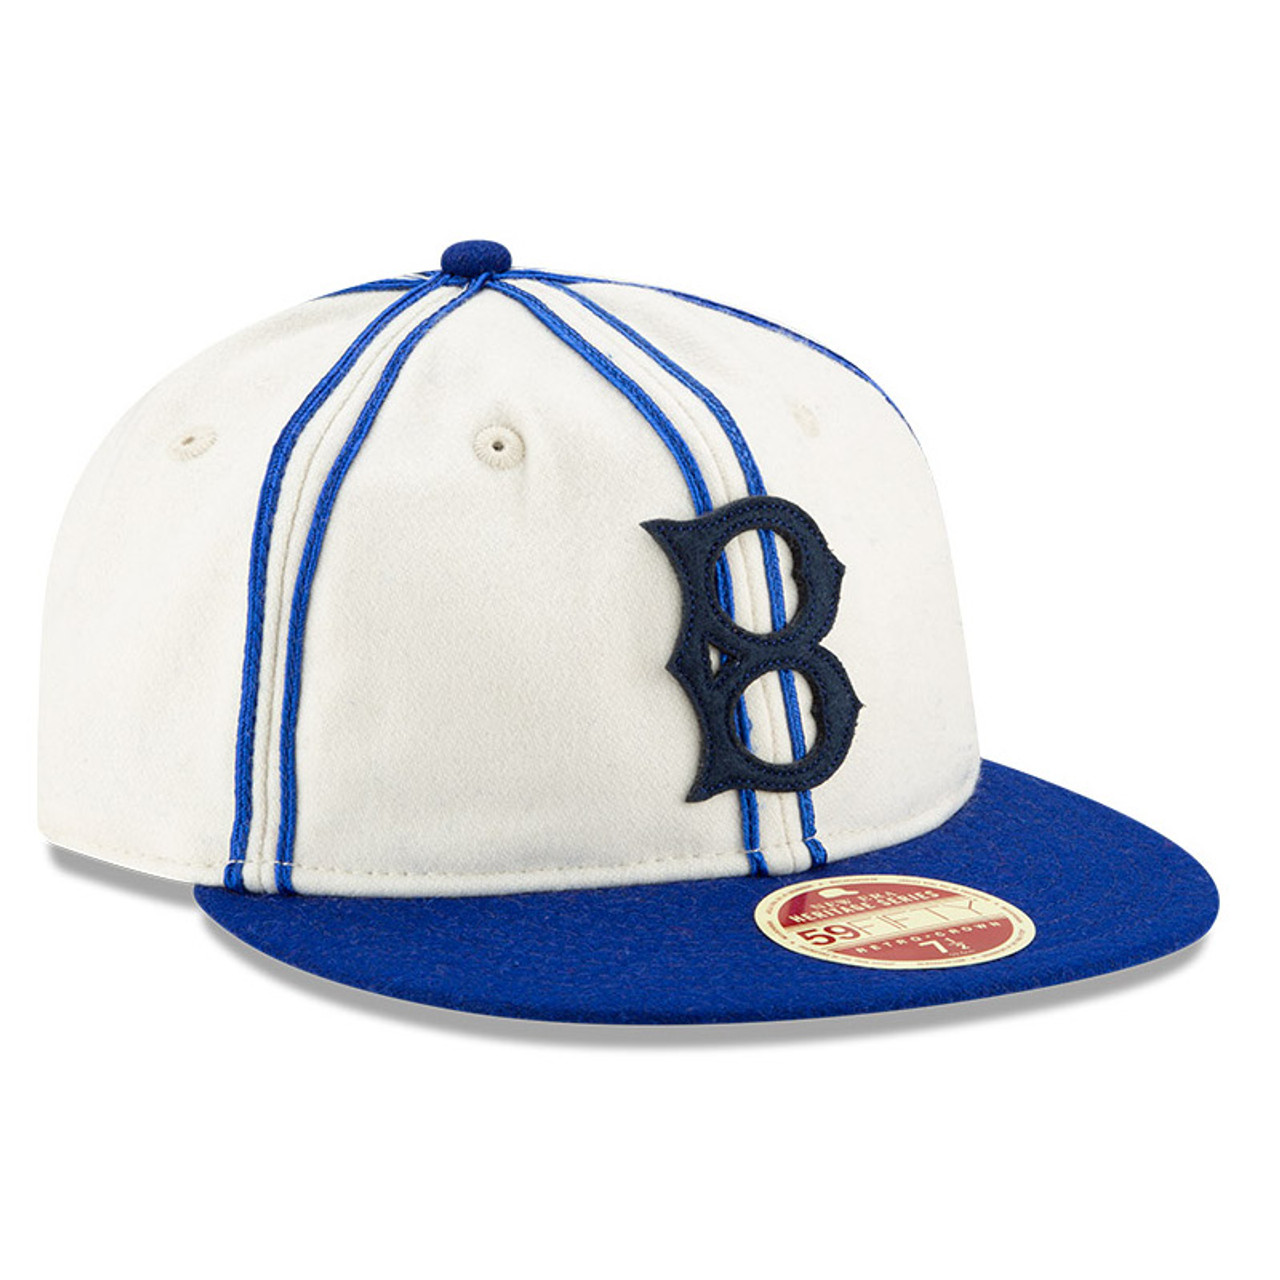 Official Vintage Dodgers Clothing, Throwback Brooklyn Dodgers Gear, Dodgers  Vintage Collection